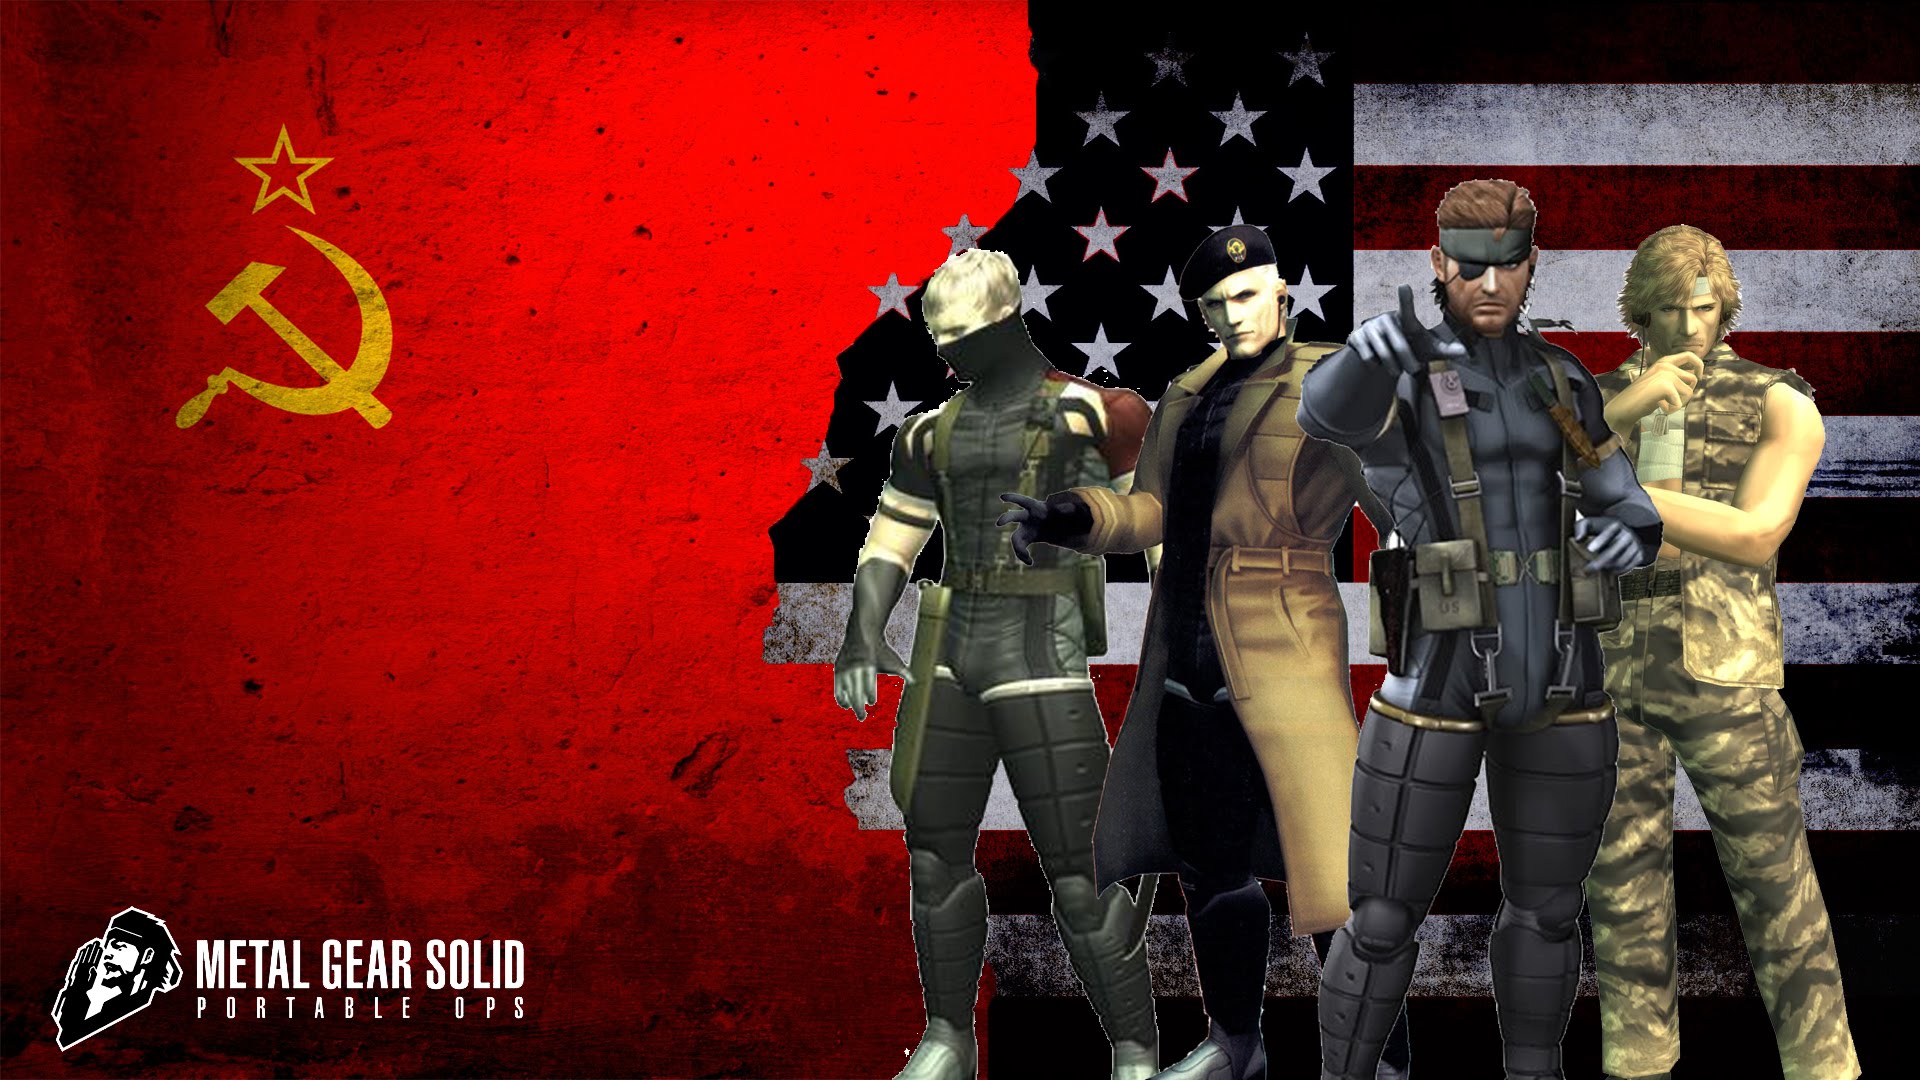 High Resolution Wallpaper | Metal Gear Solid: Portable Ops 1920x1080 px